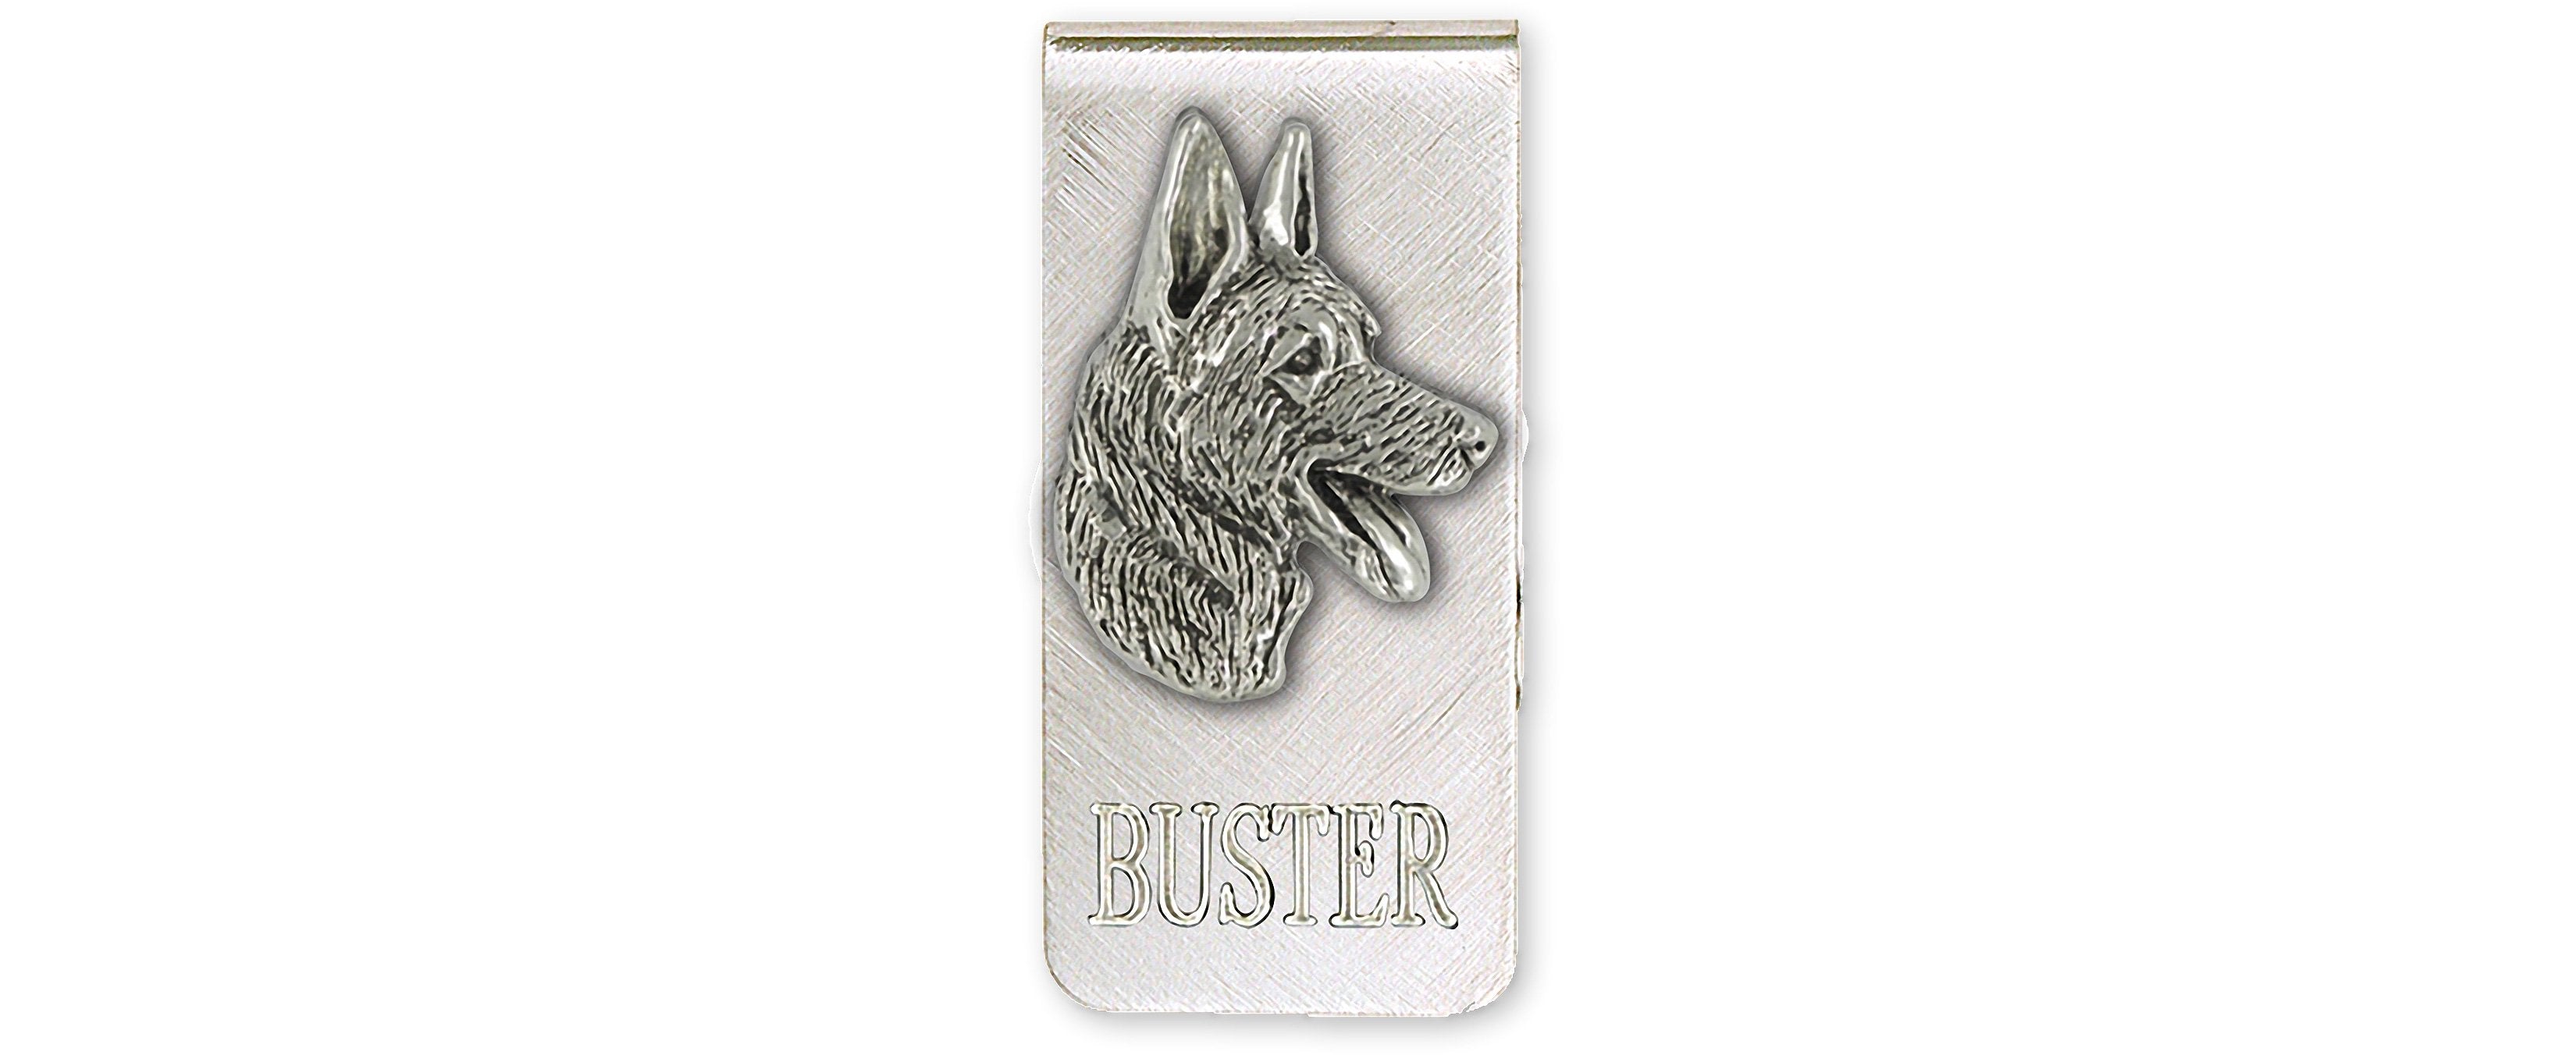 German Shepherd Dog Pendant Sterling Silver | Esquivel and Fees | Handmade  Charm and Jewelry Designs